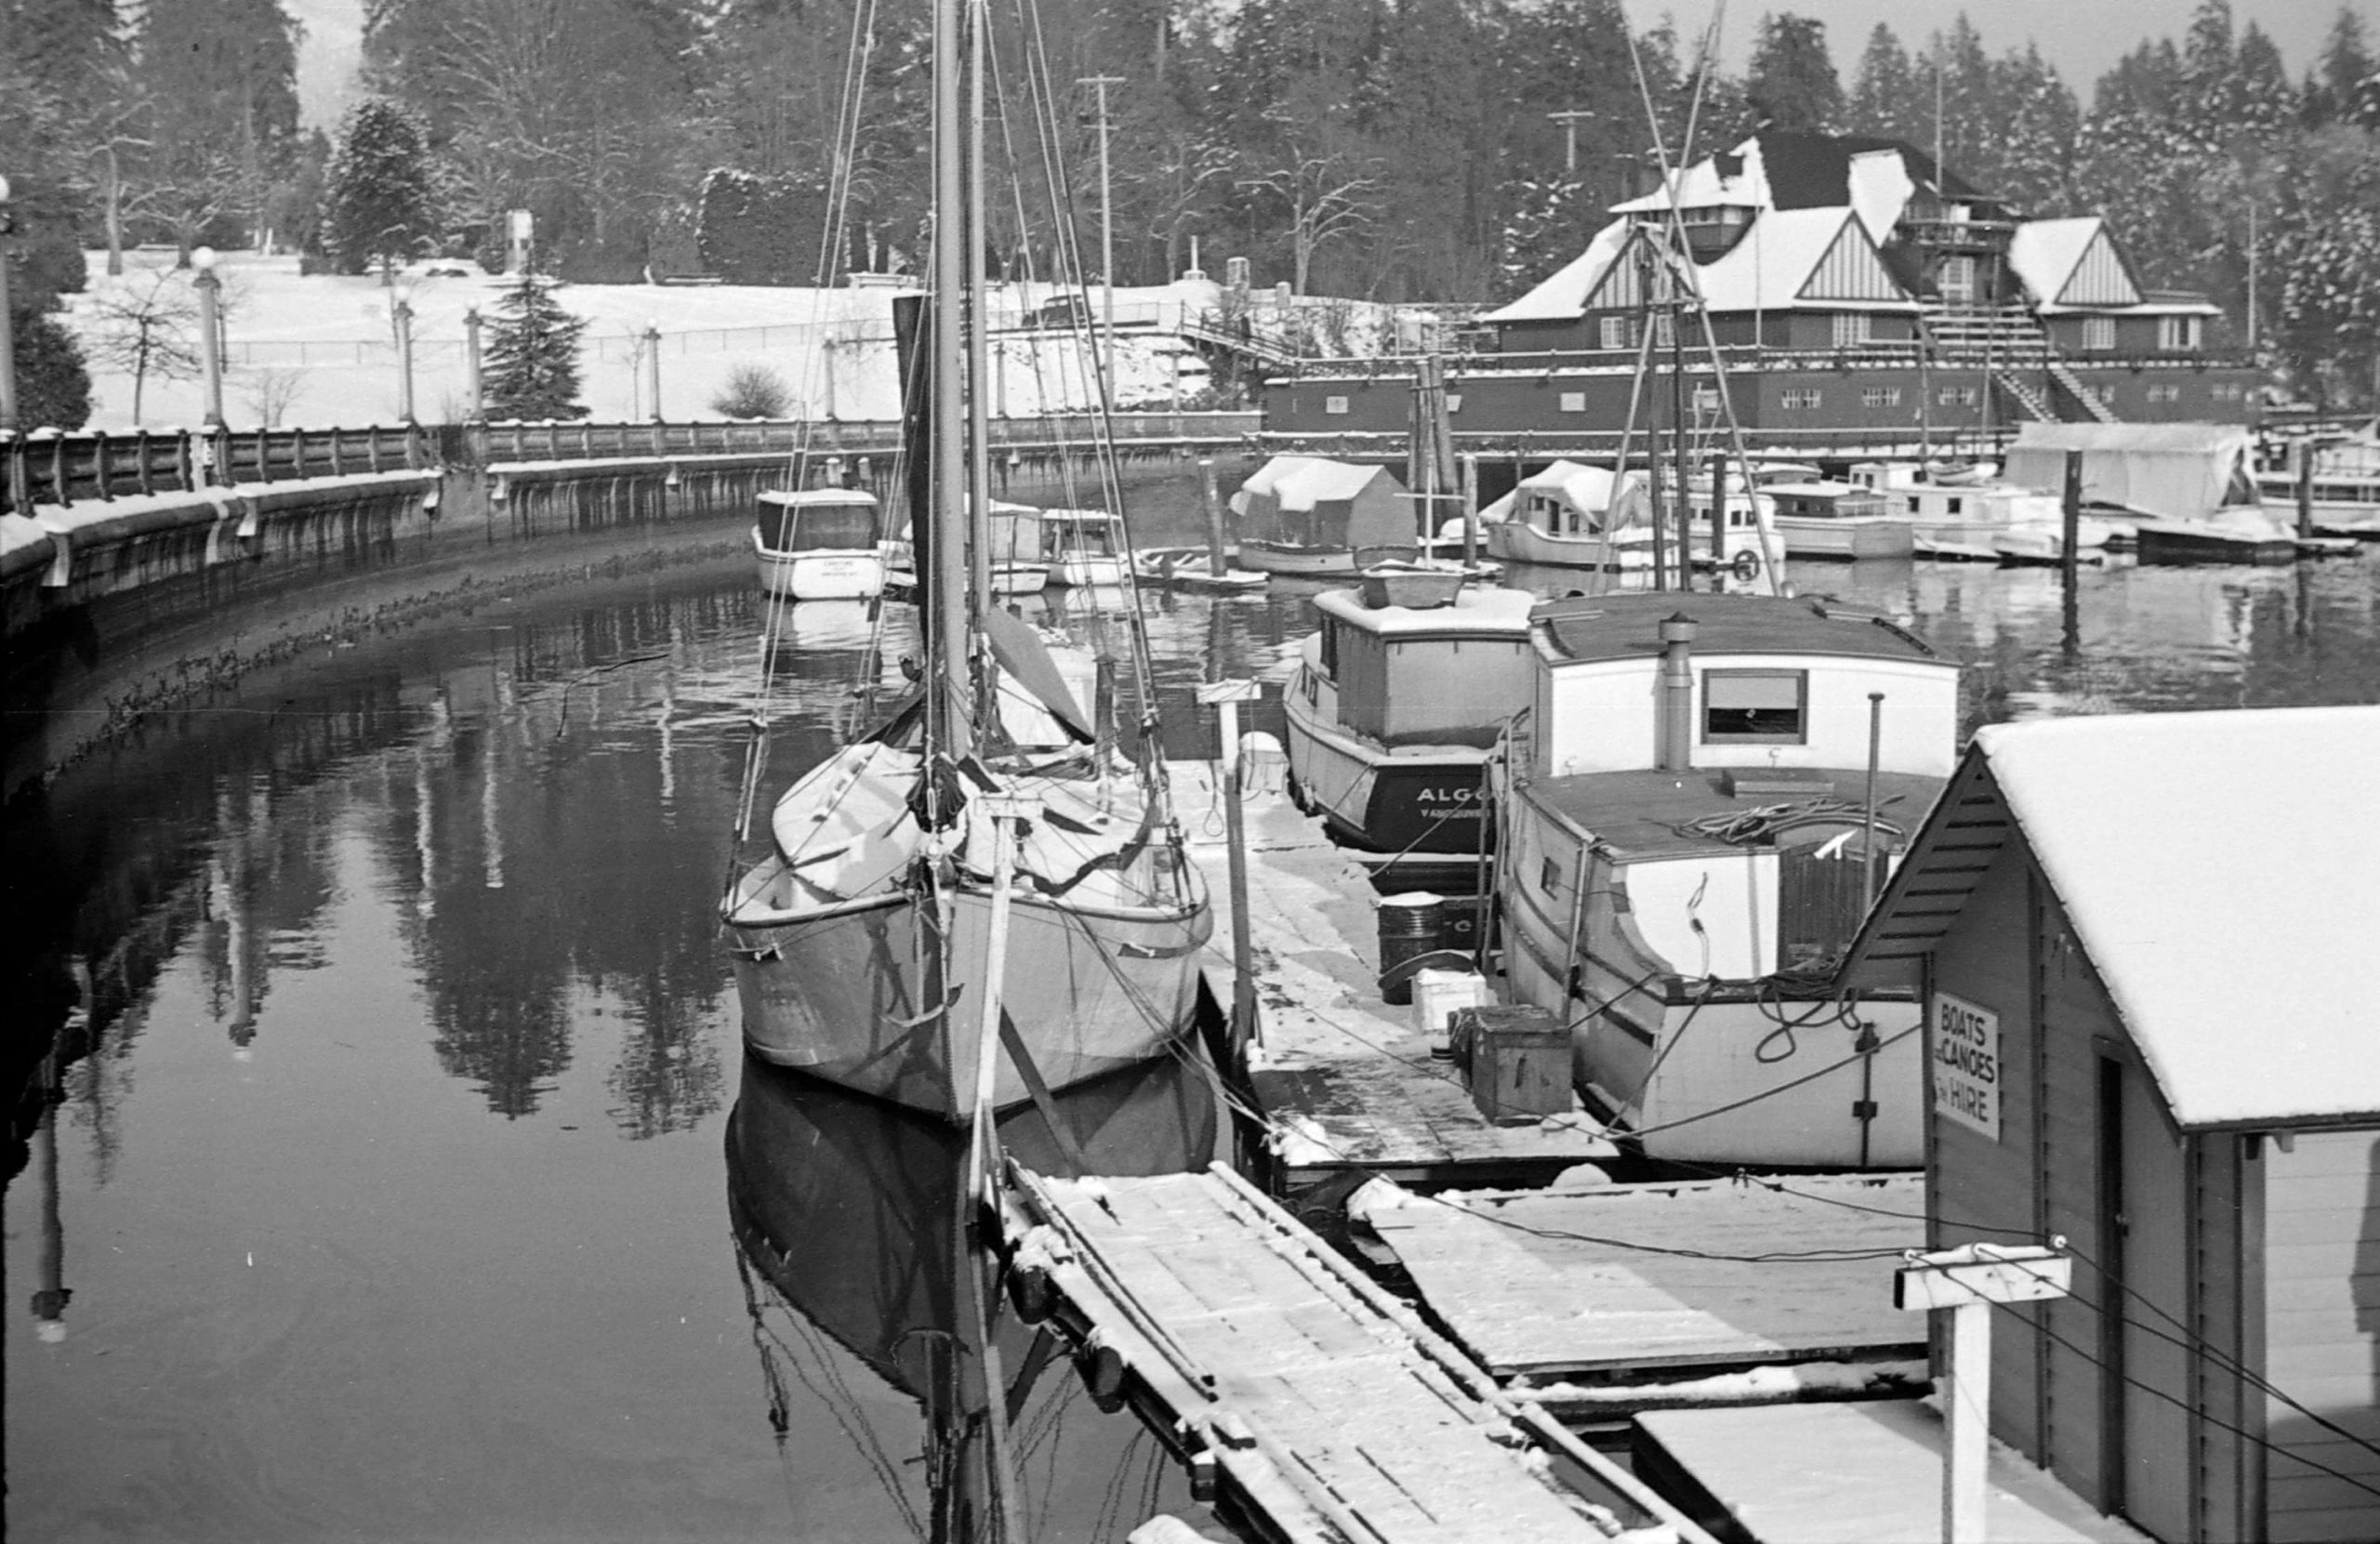 1936 - Boats and docks covered in snow